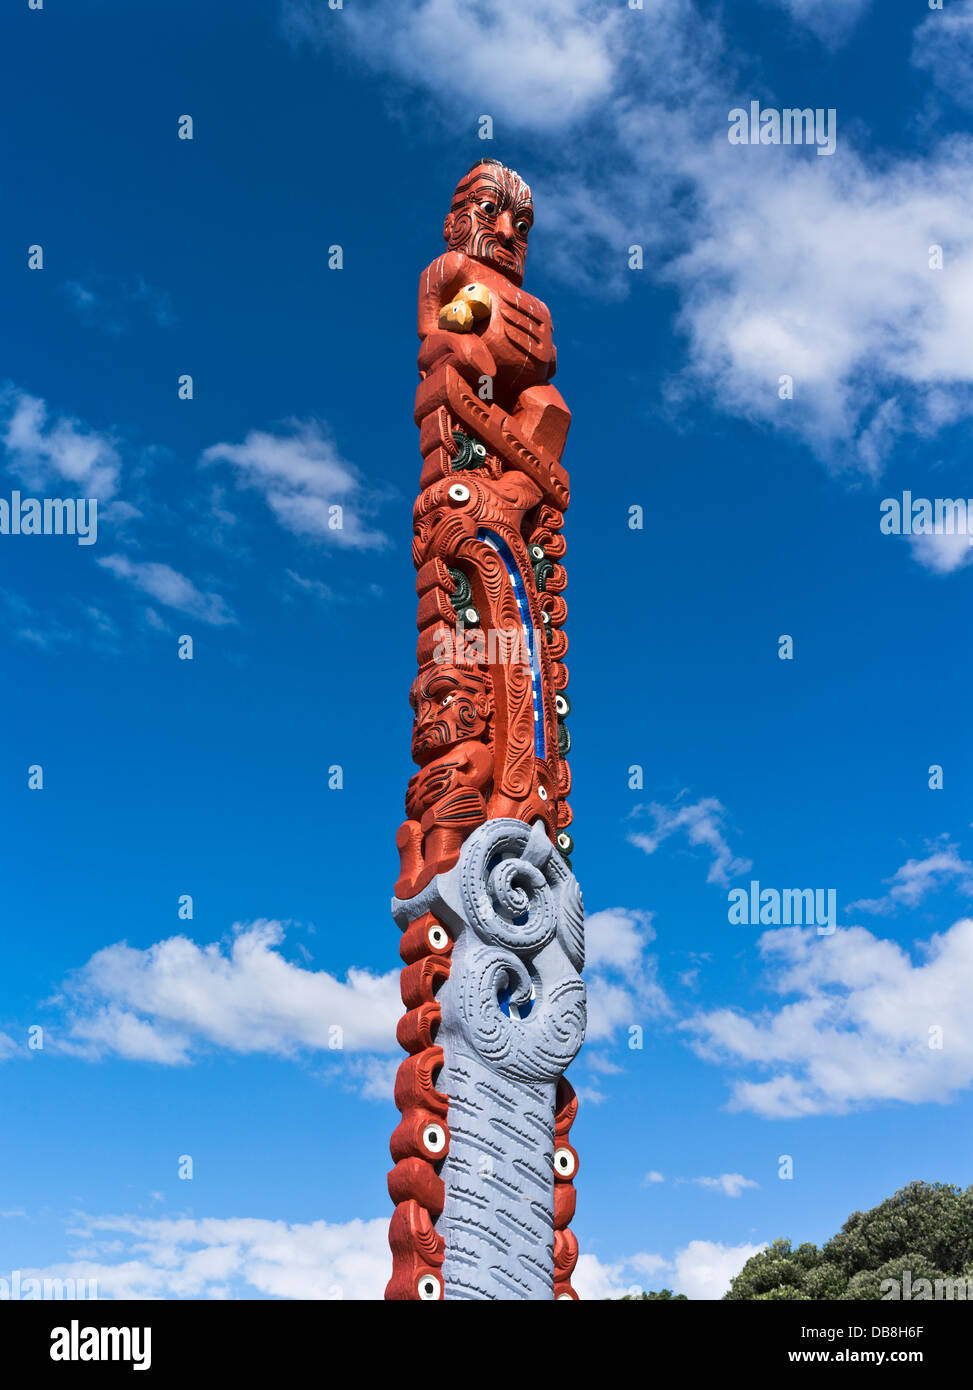 dh Waiotahi Beach BAY OF PLENTY NEW ZEALAND Maori carved wooden pole near Opotiki carving heritage wood north island carvings sculpture Stock Photo